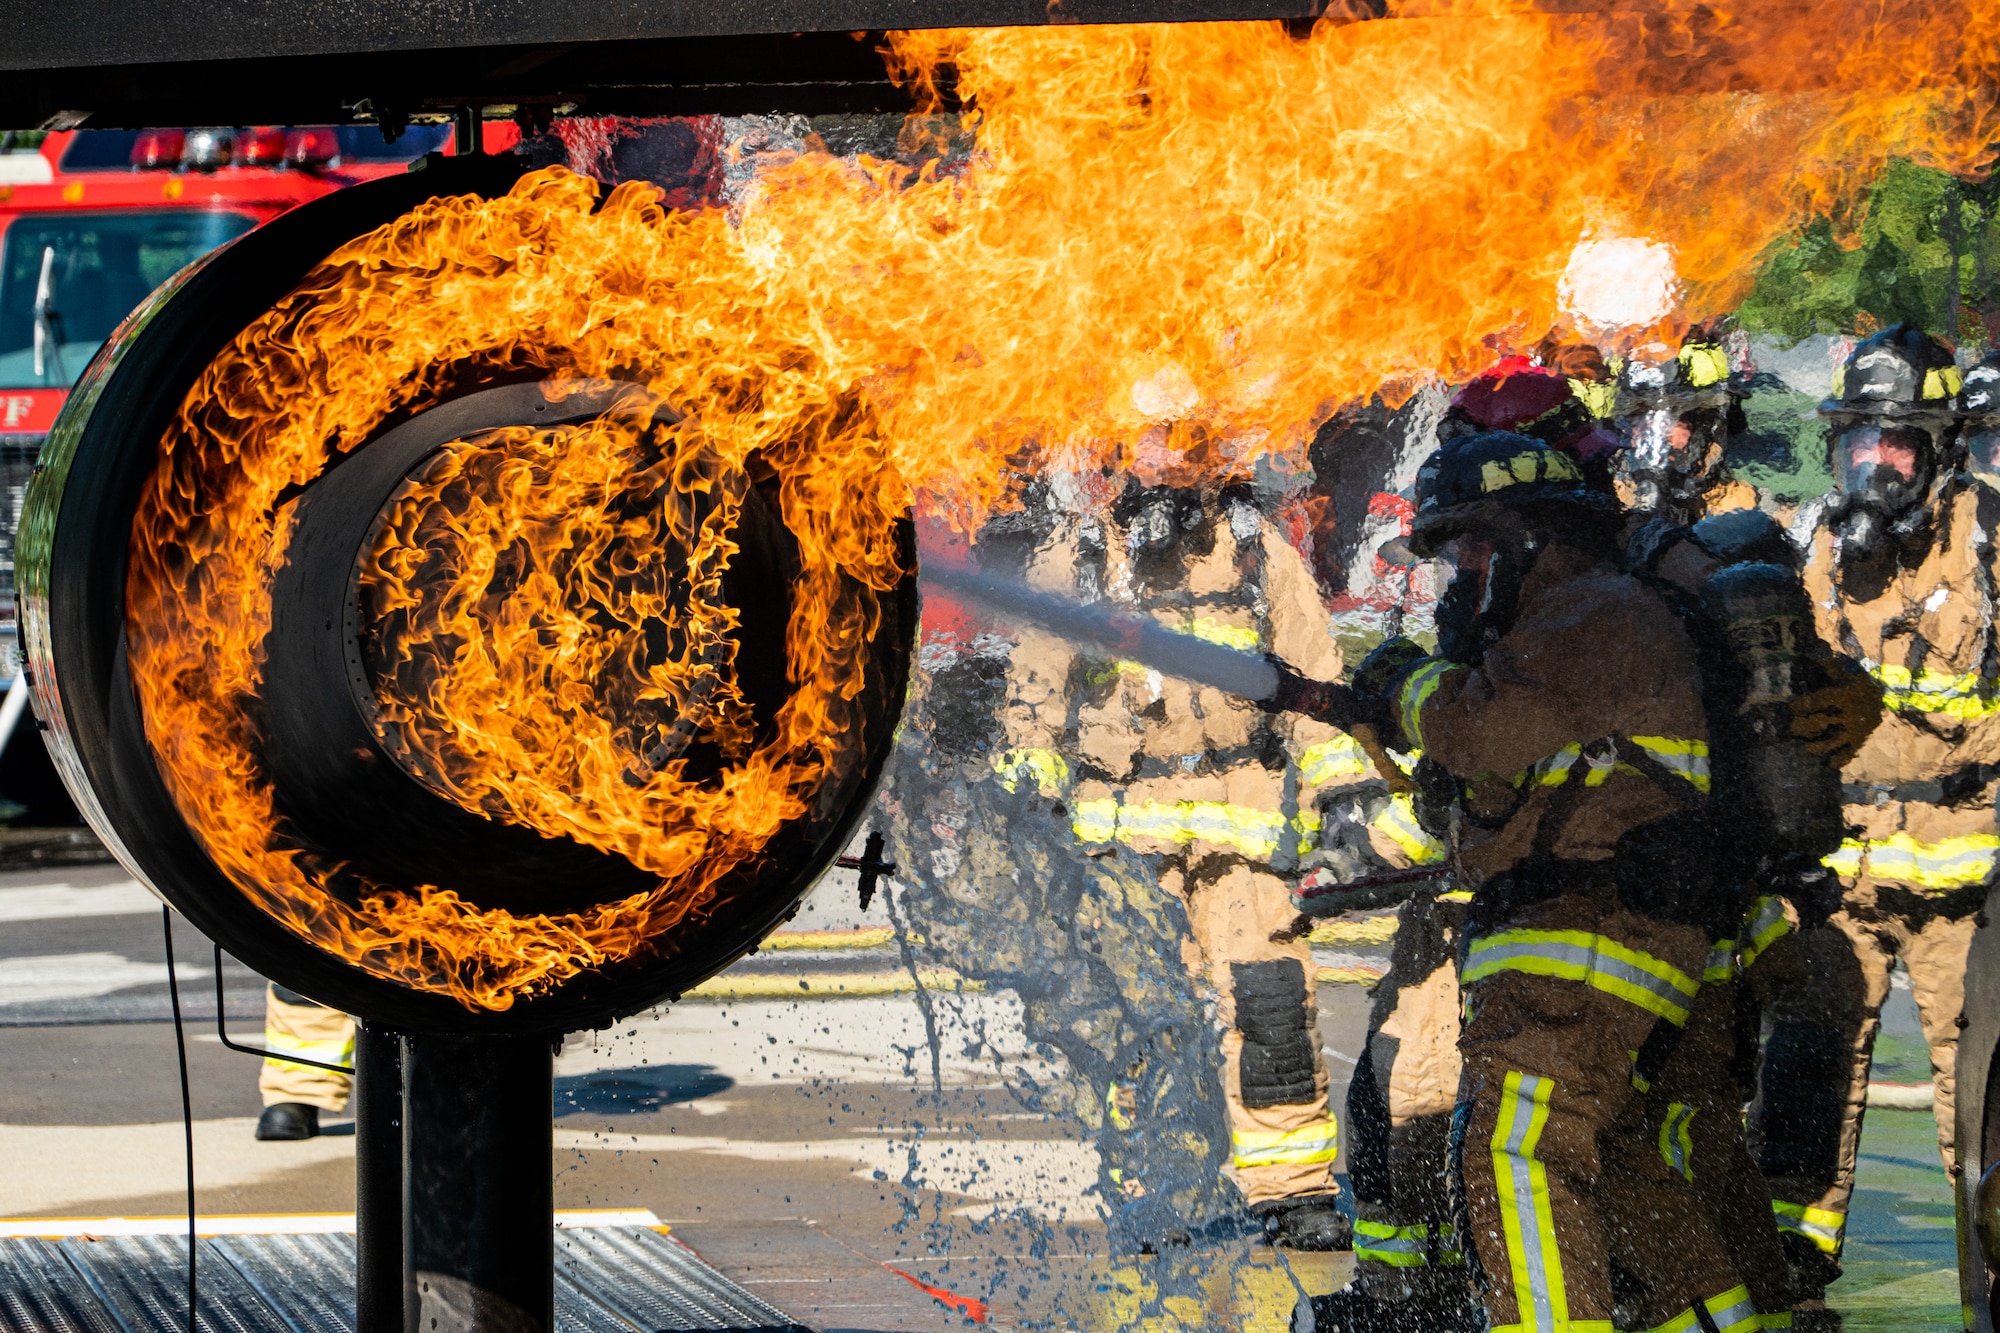 914th Fire Emergency Services members work together to extinguish an aircraft fire during a training scenario